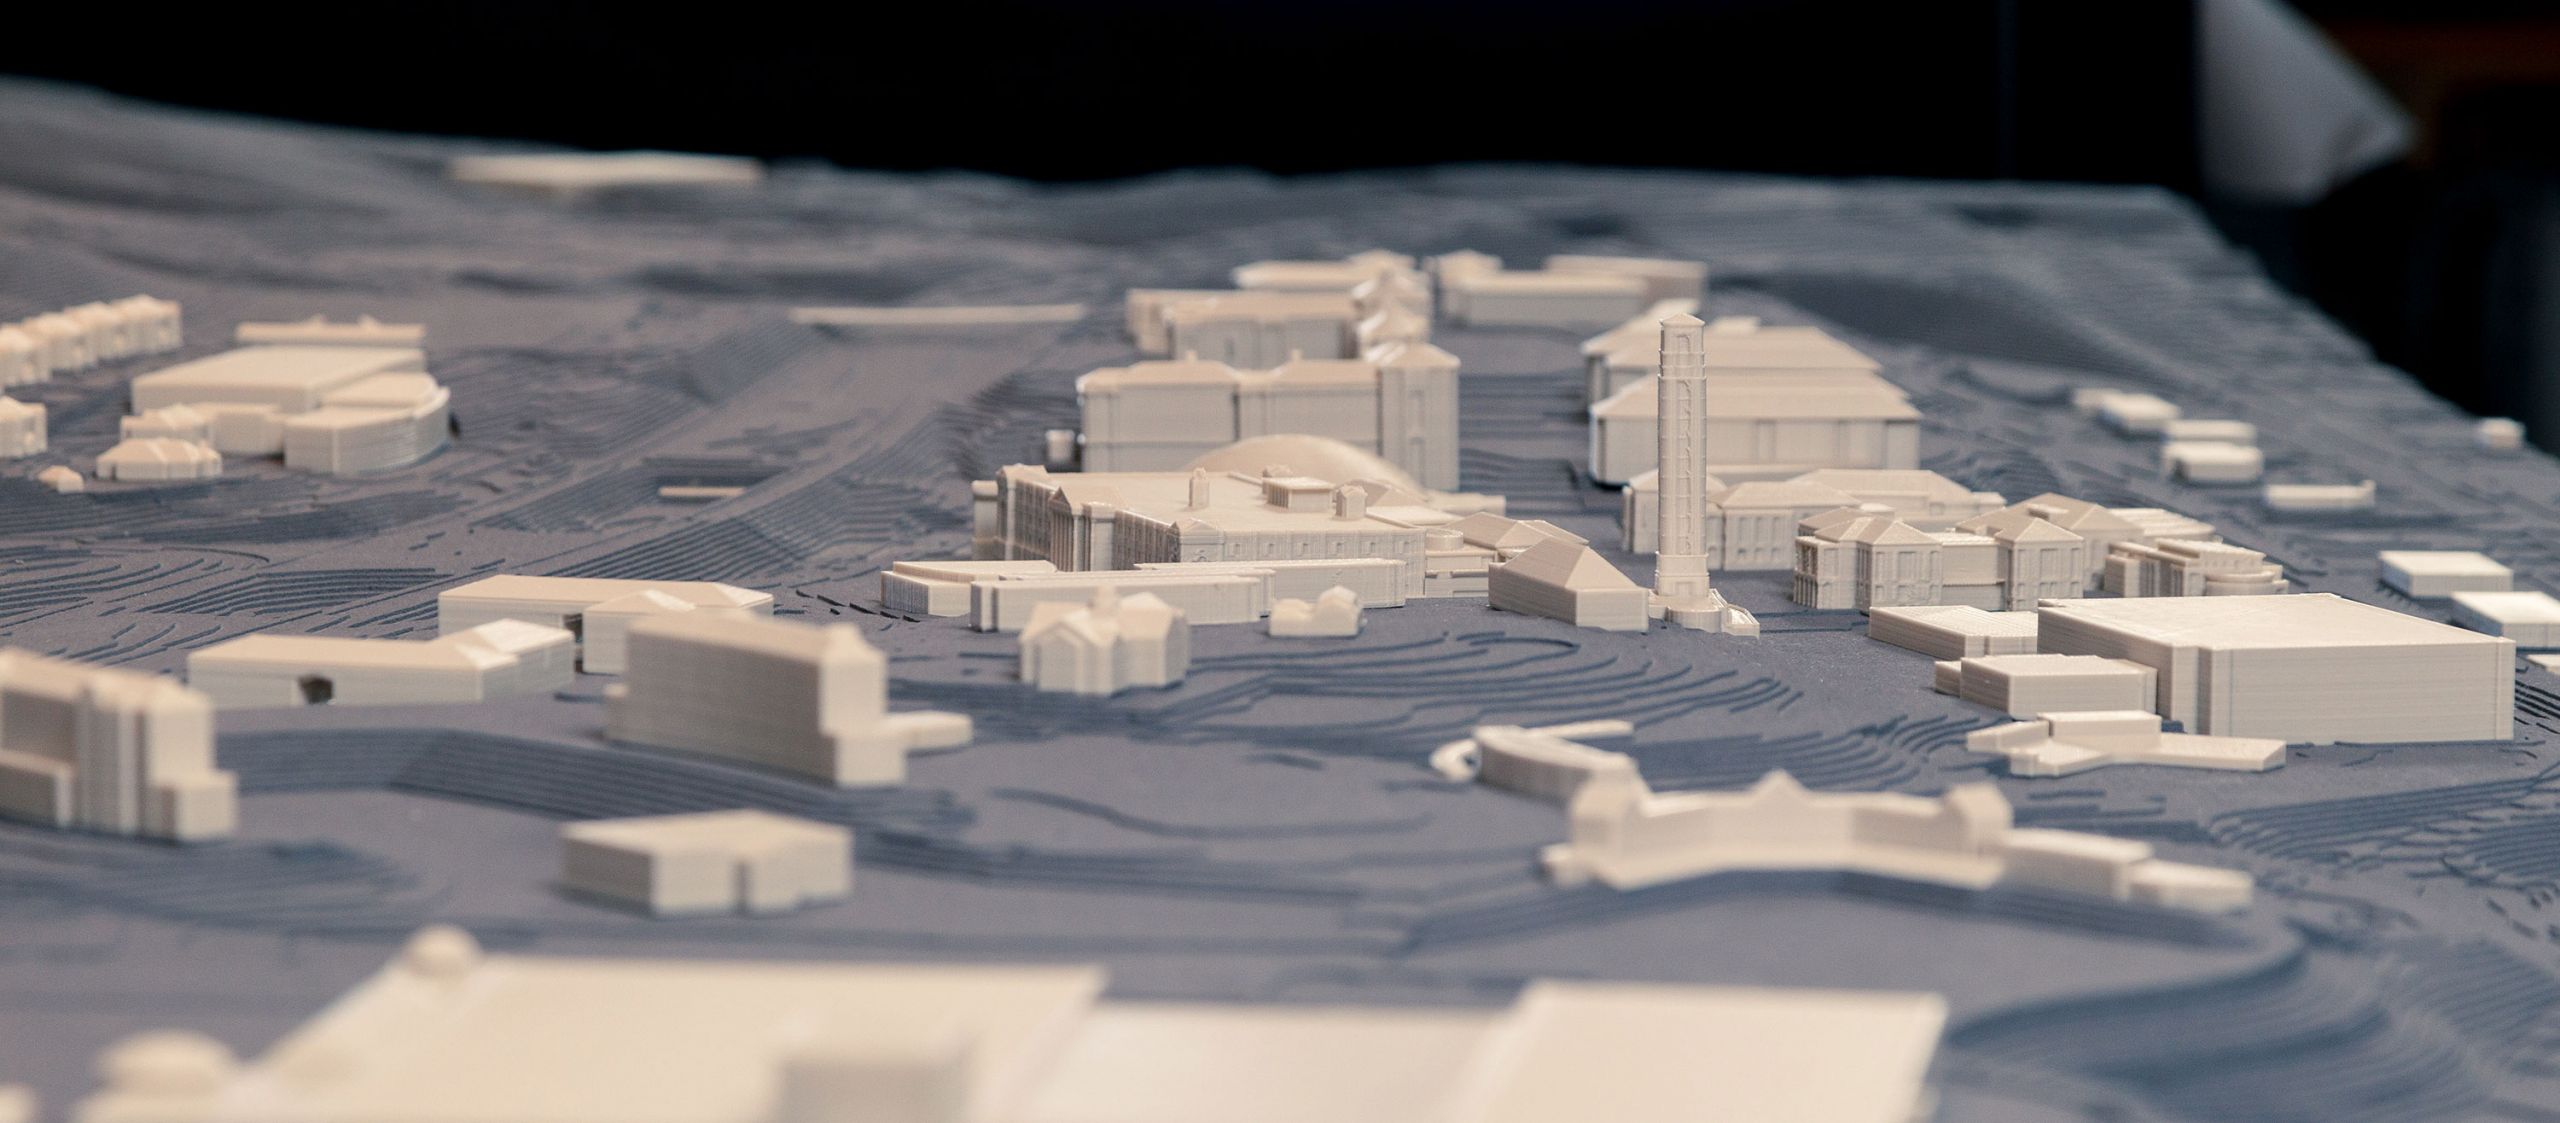 A 3D model by VMDO architects shows Liberty's Academic Commons as viewed from Green Hall.